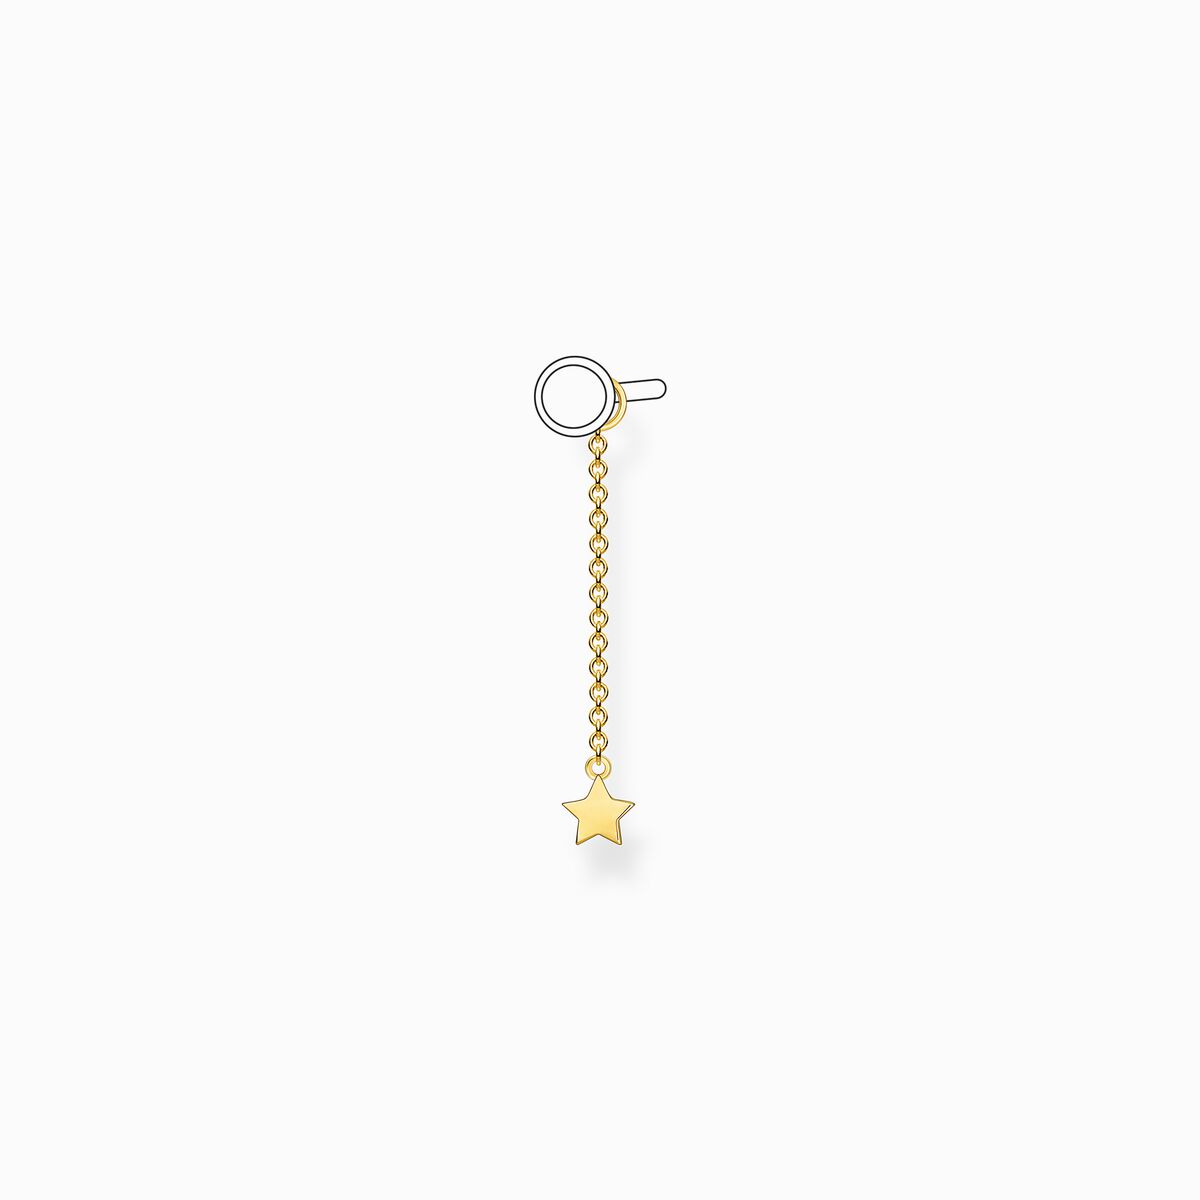 Golden earring THOMAS with SABO – chain pendant